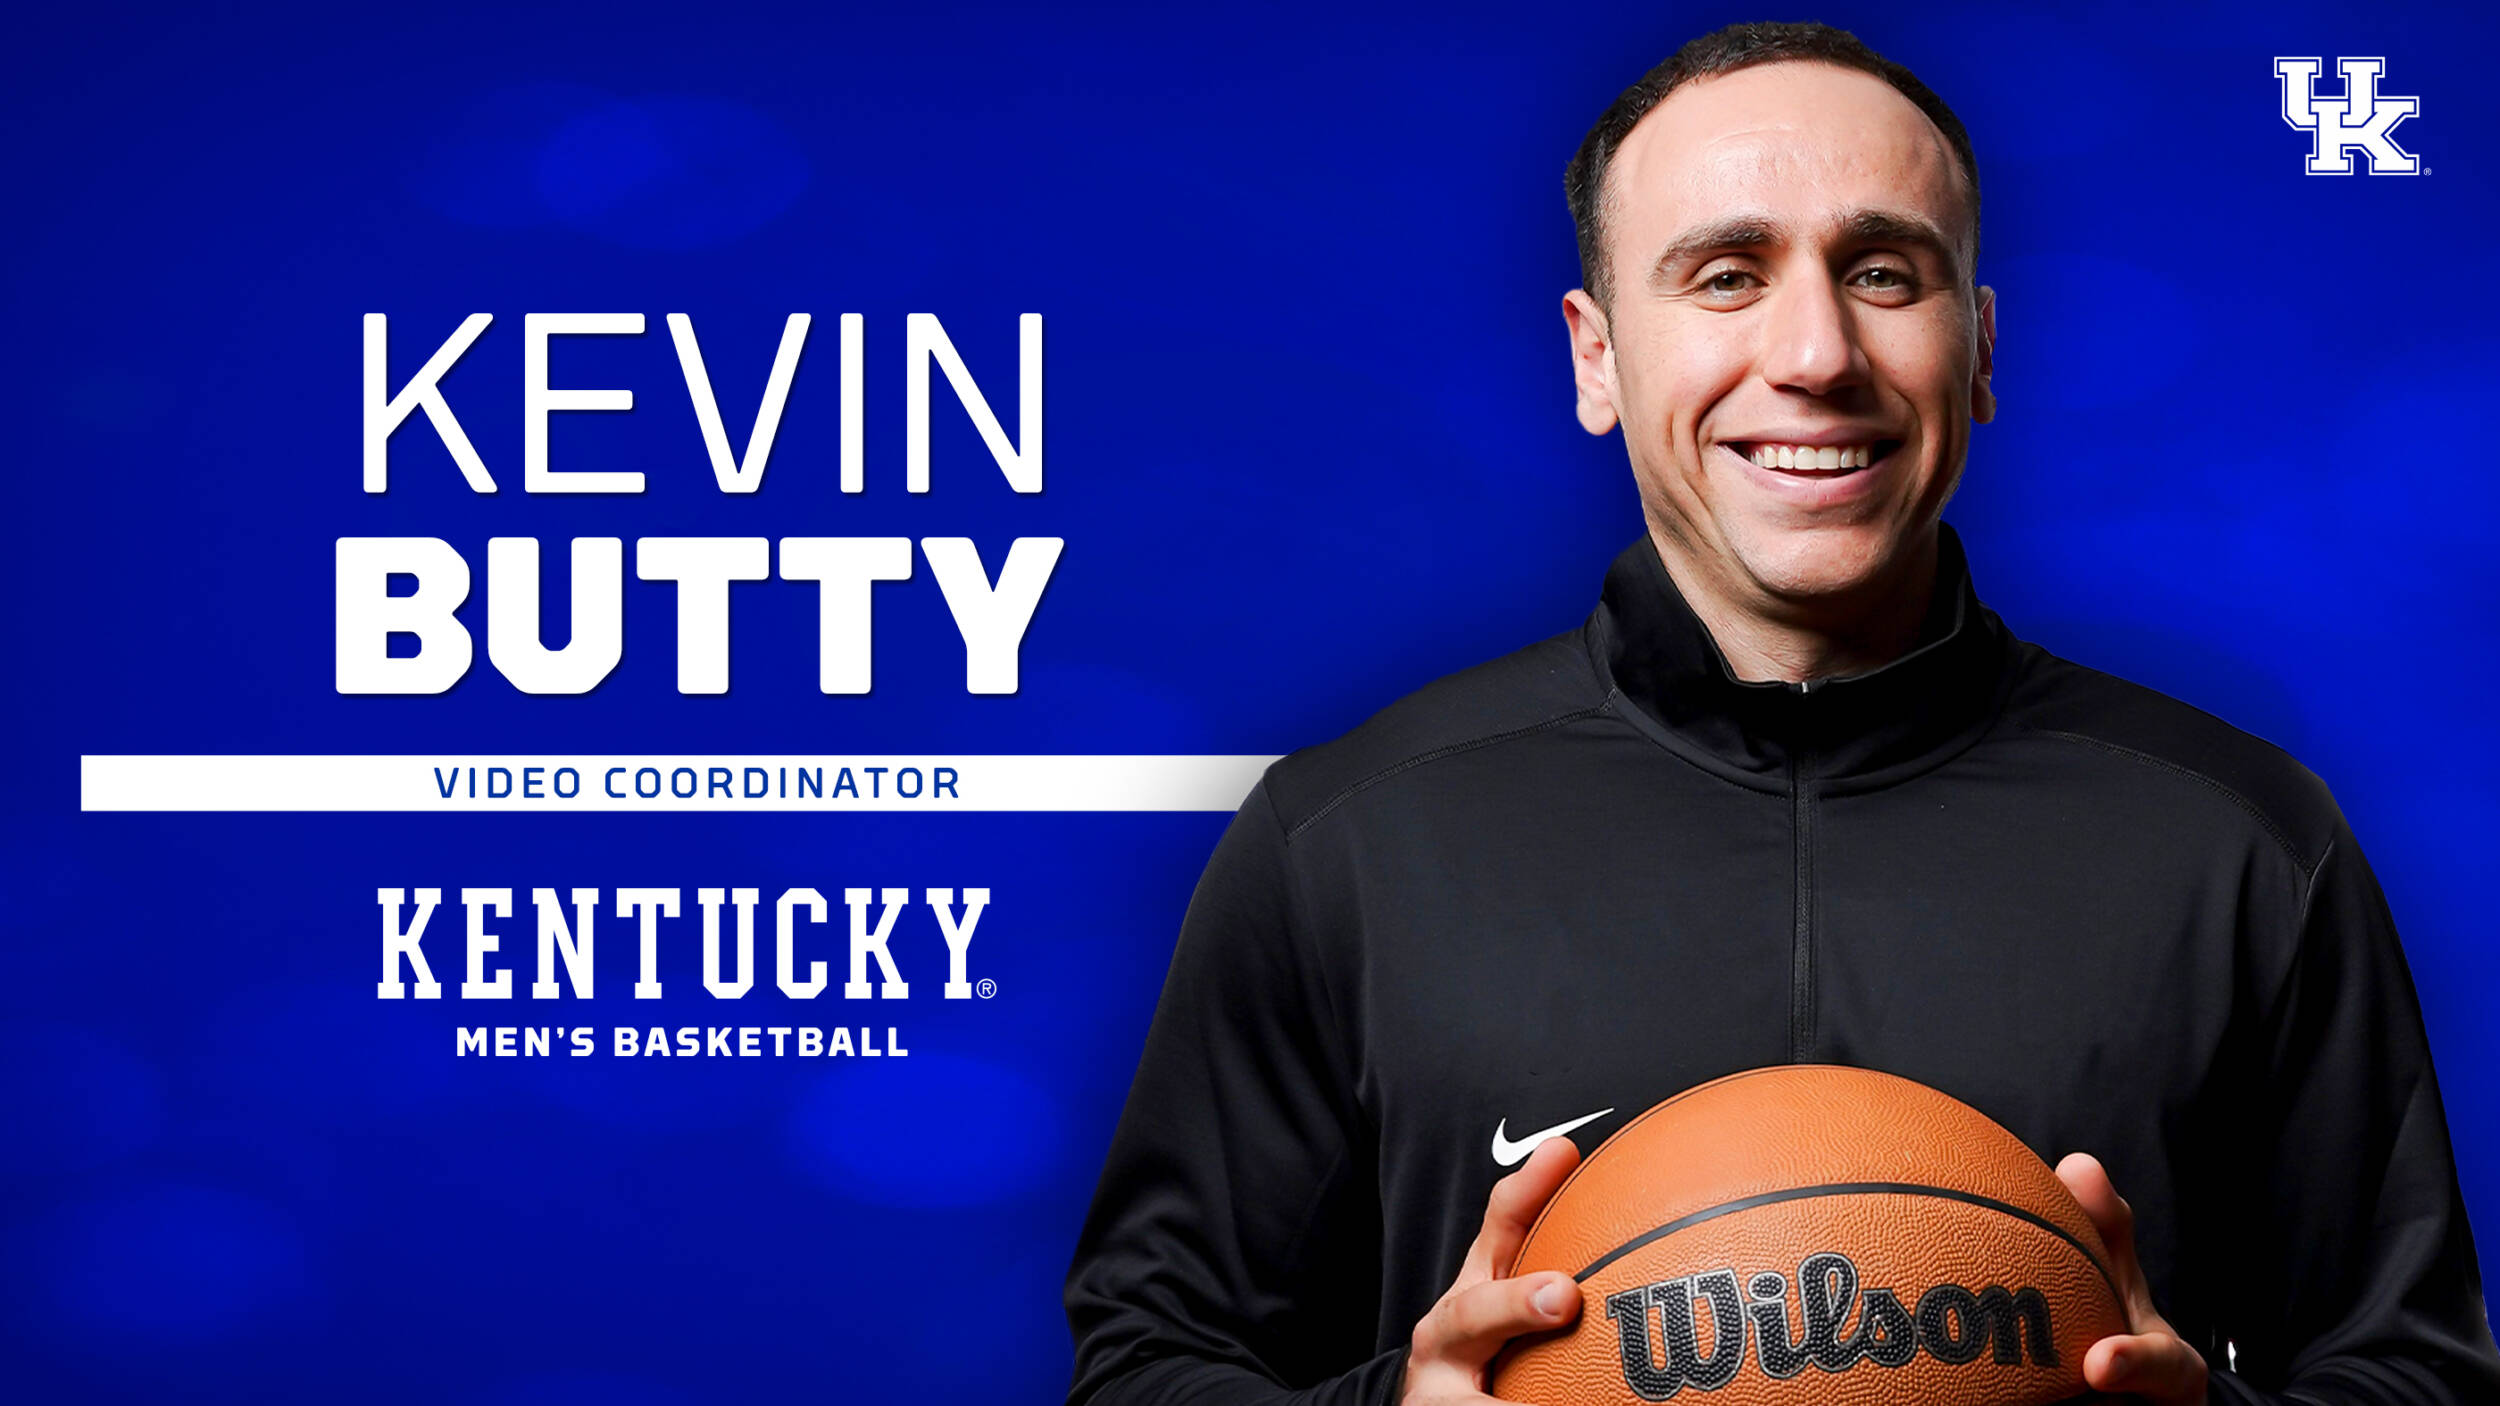 Kevin Butty Named Men’s Basketball Video Coordinator